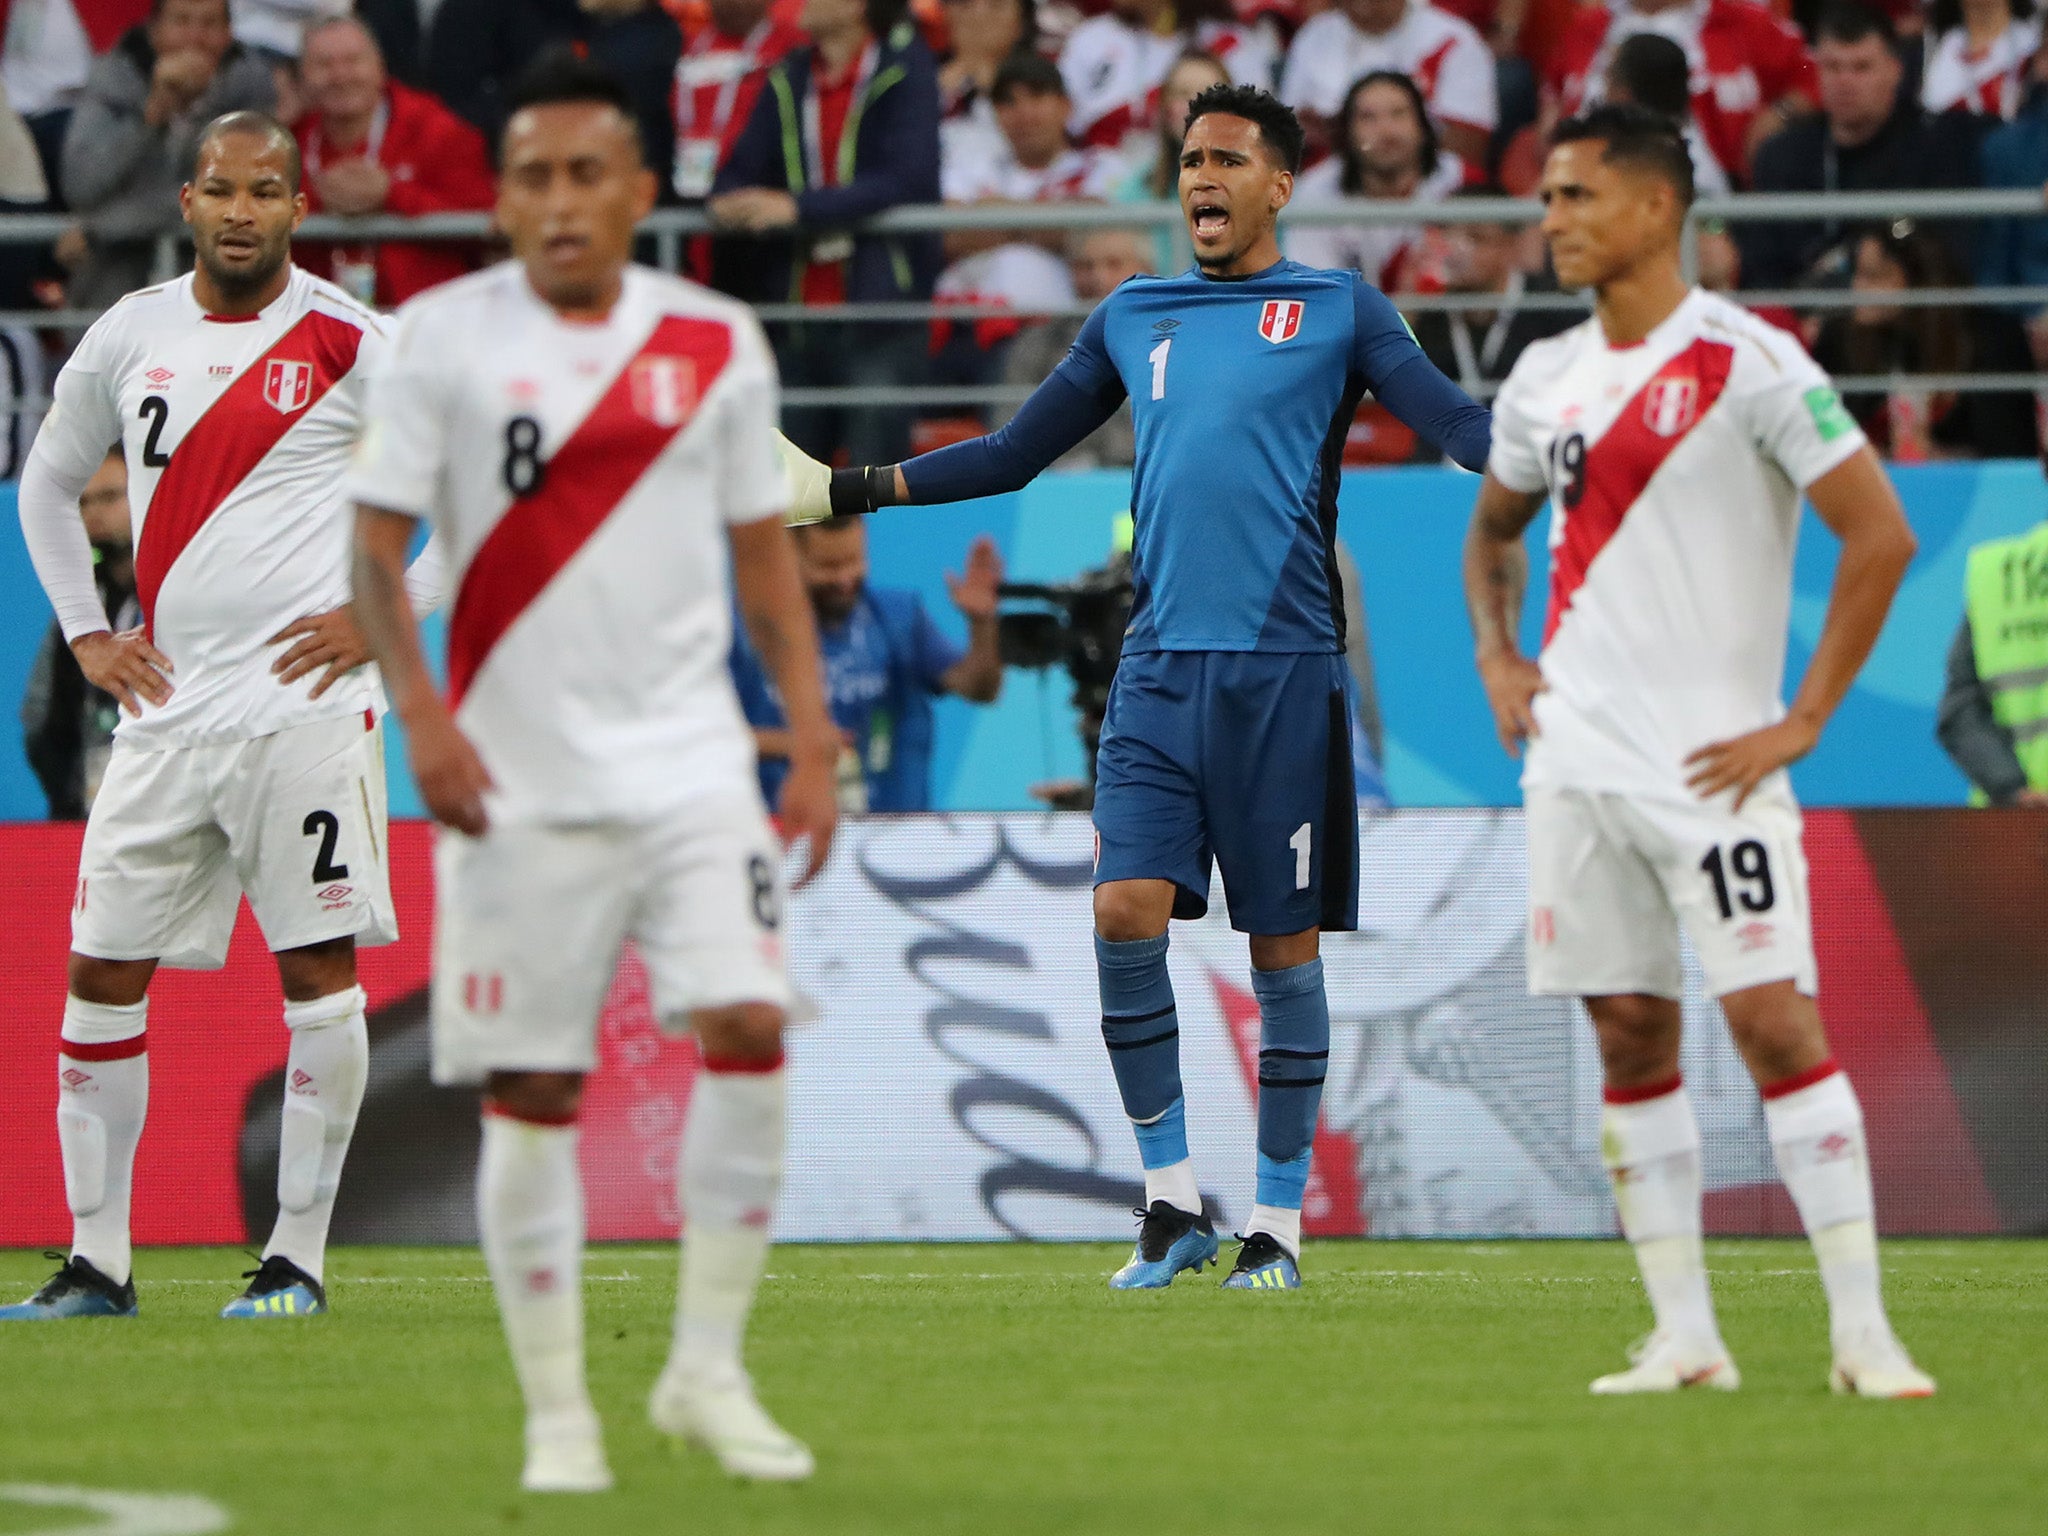 &#13;
Peru spurned a number of chances to equalise and salvage a point (Reuters)&#13;